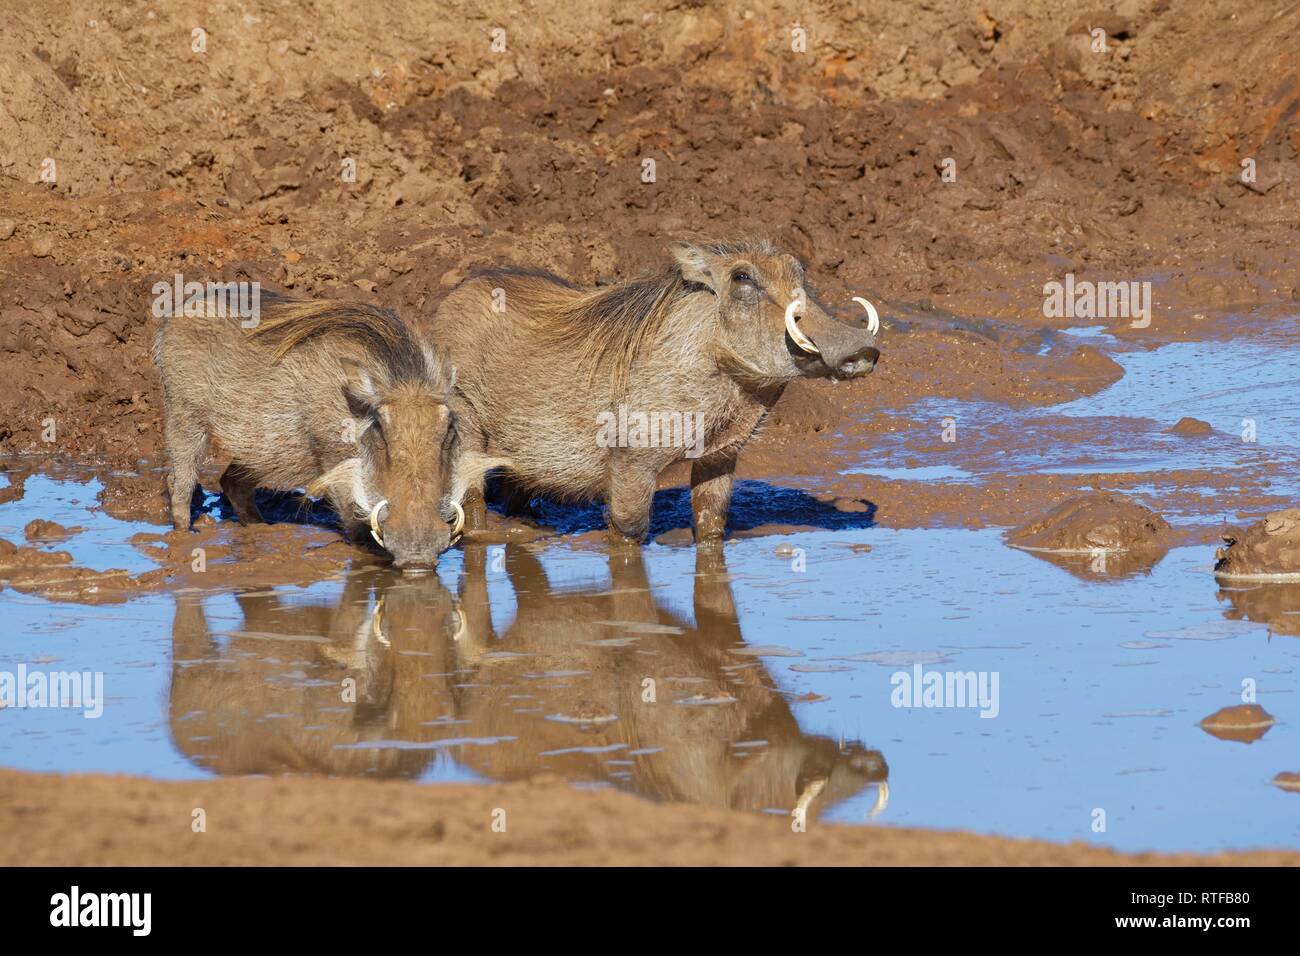 Common warthogs (Phacochoerus africanus), two adults in muddy water, drinking at a waterhole, Addo Elephant National Park Stock Photo